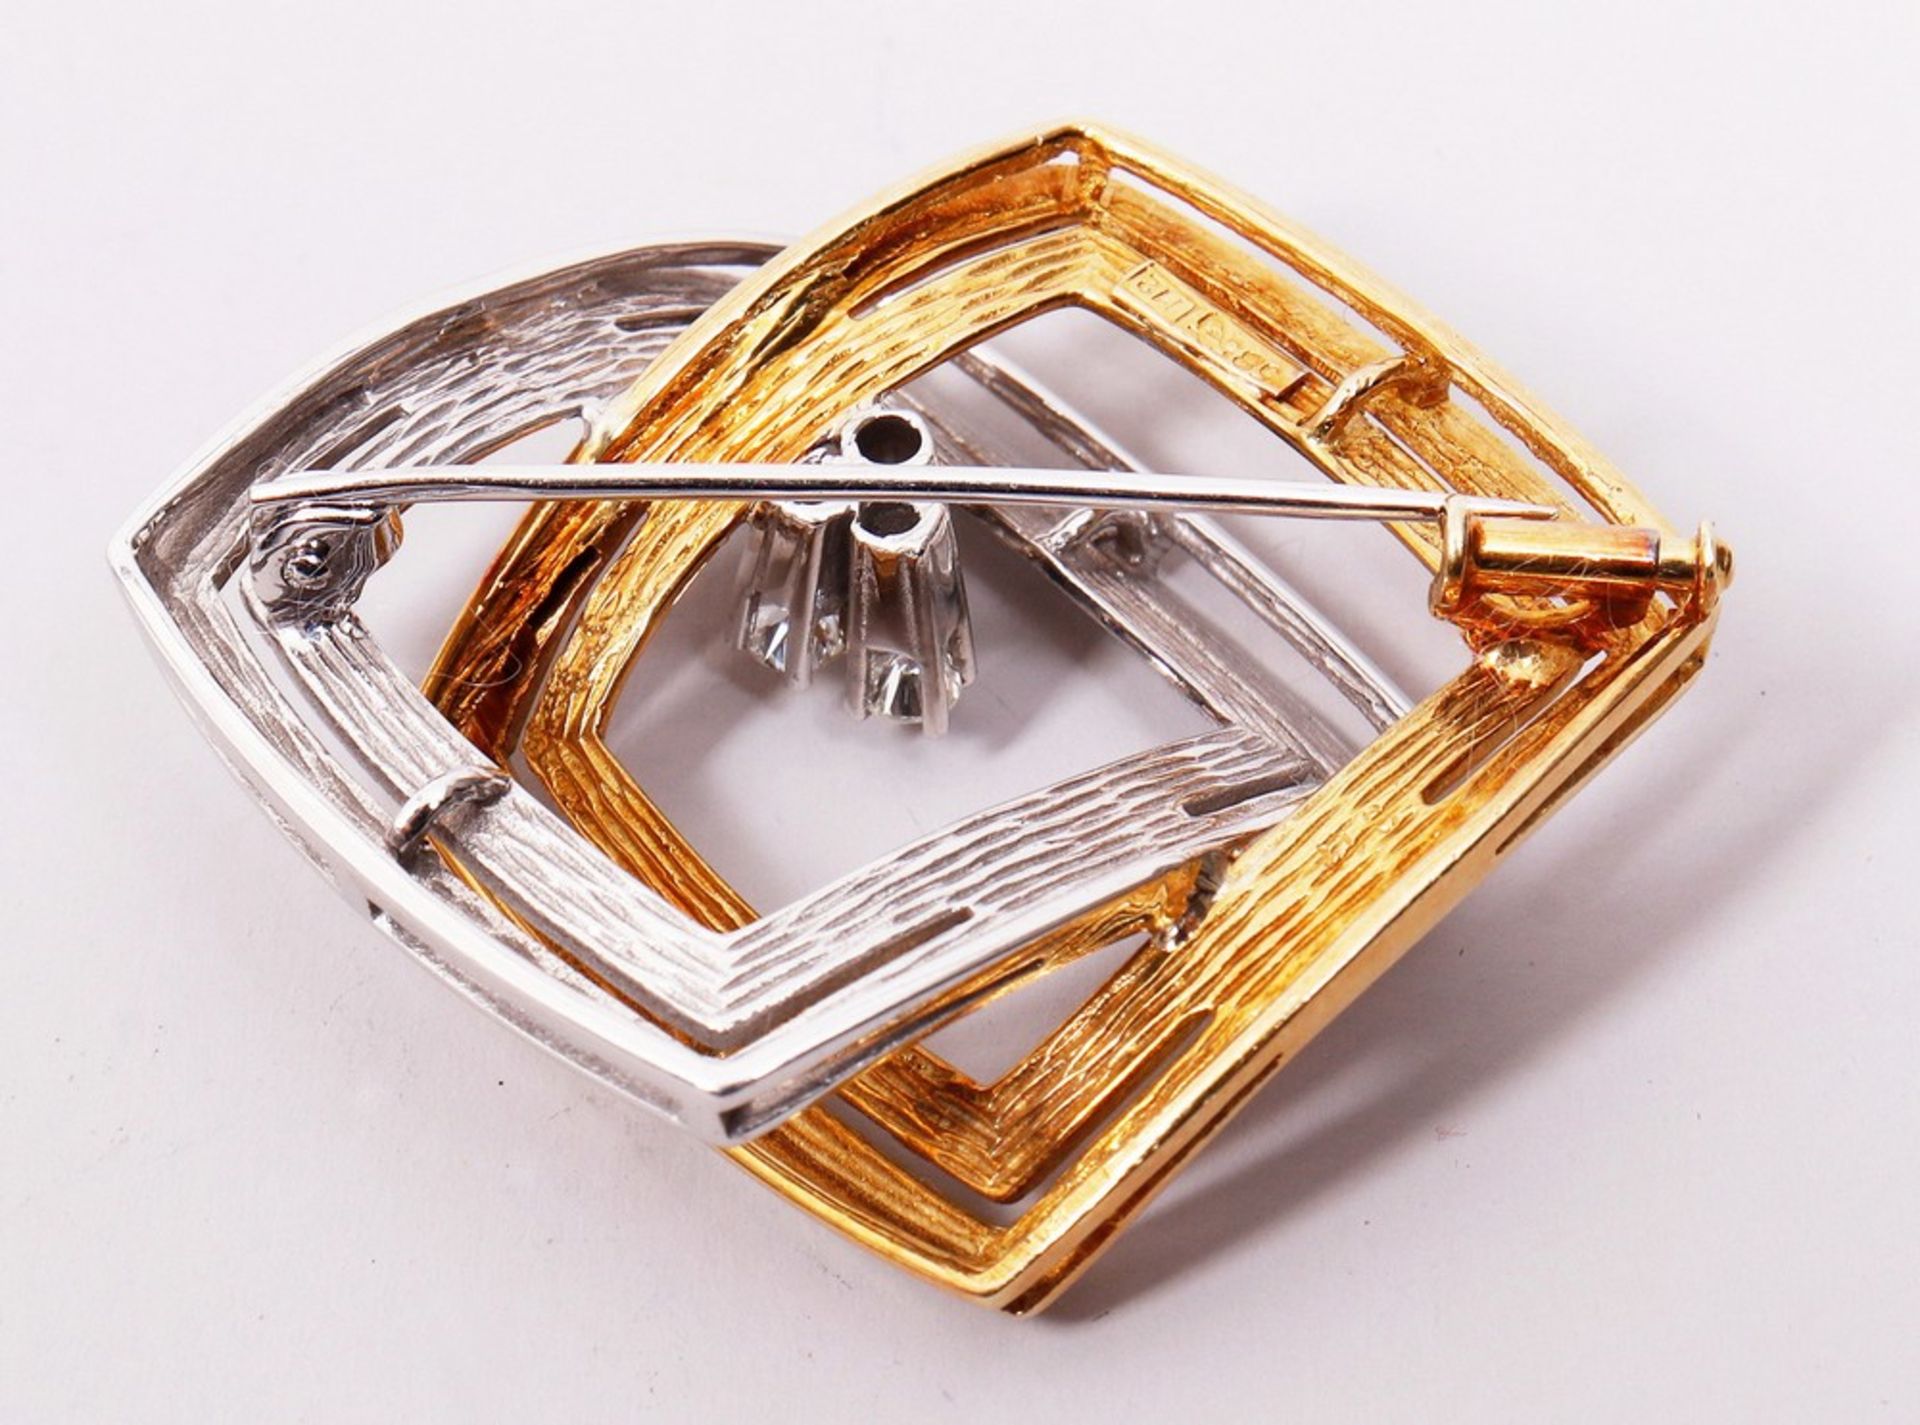 Modernism brooch, 585 yellow/white gold - Image 4 of 5